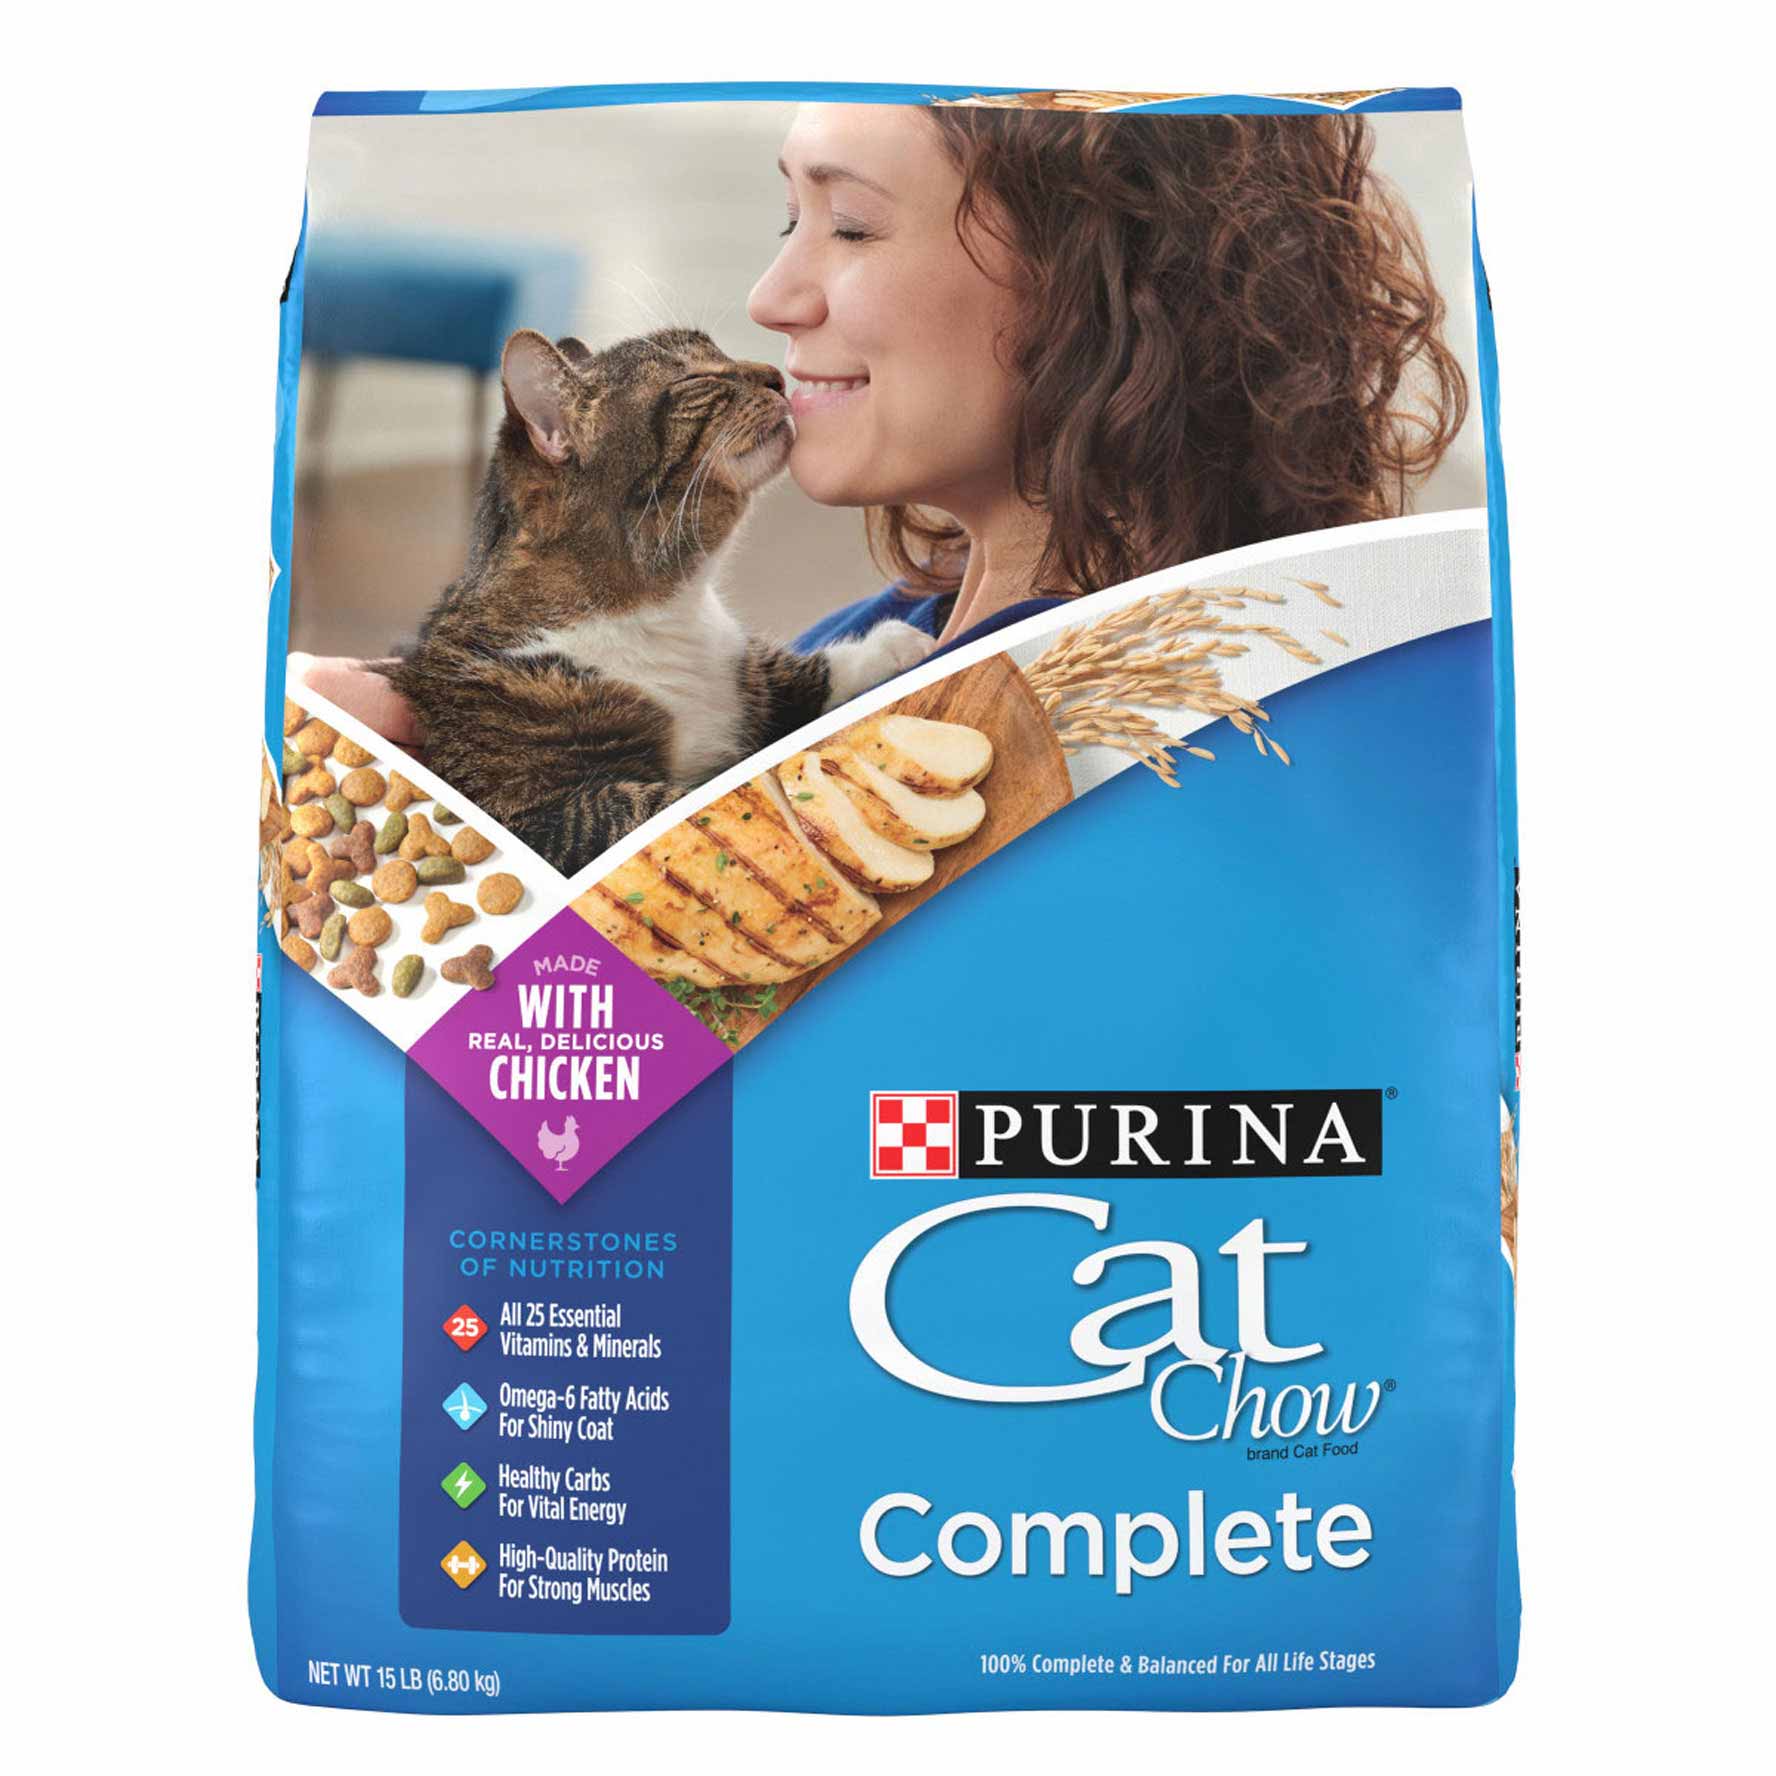 Purina Cat Chow High Protein Dry Cat Food, Complete - 15 Pound Bag